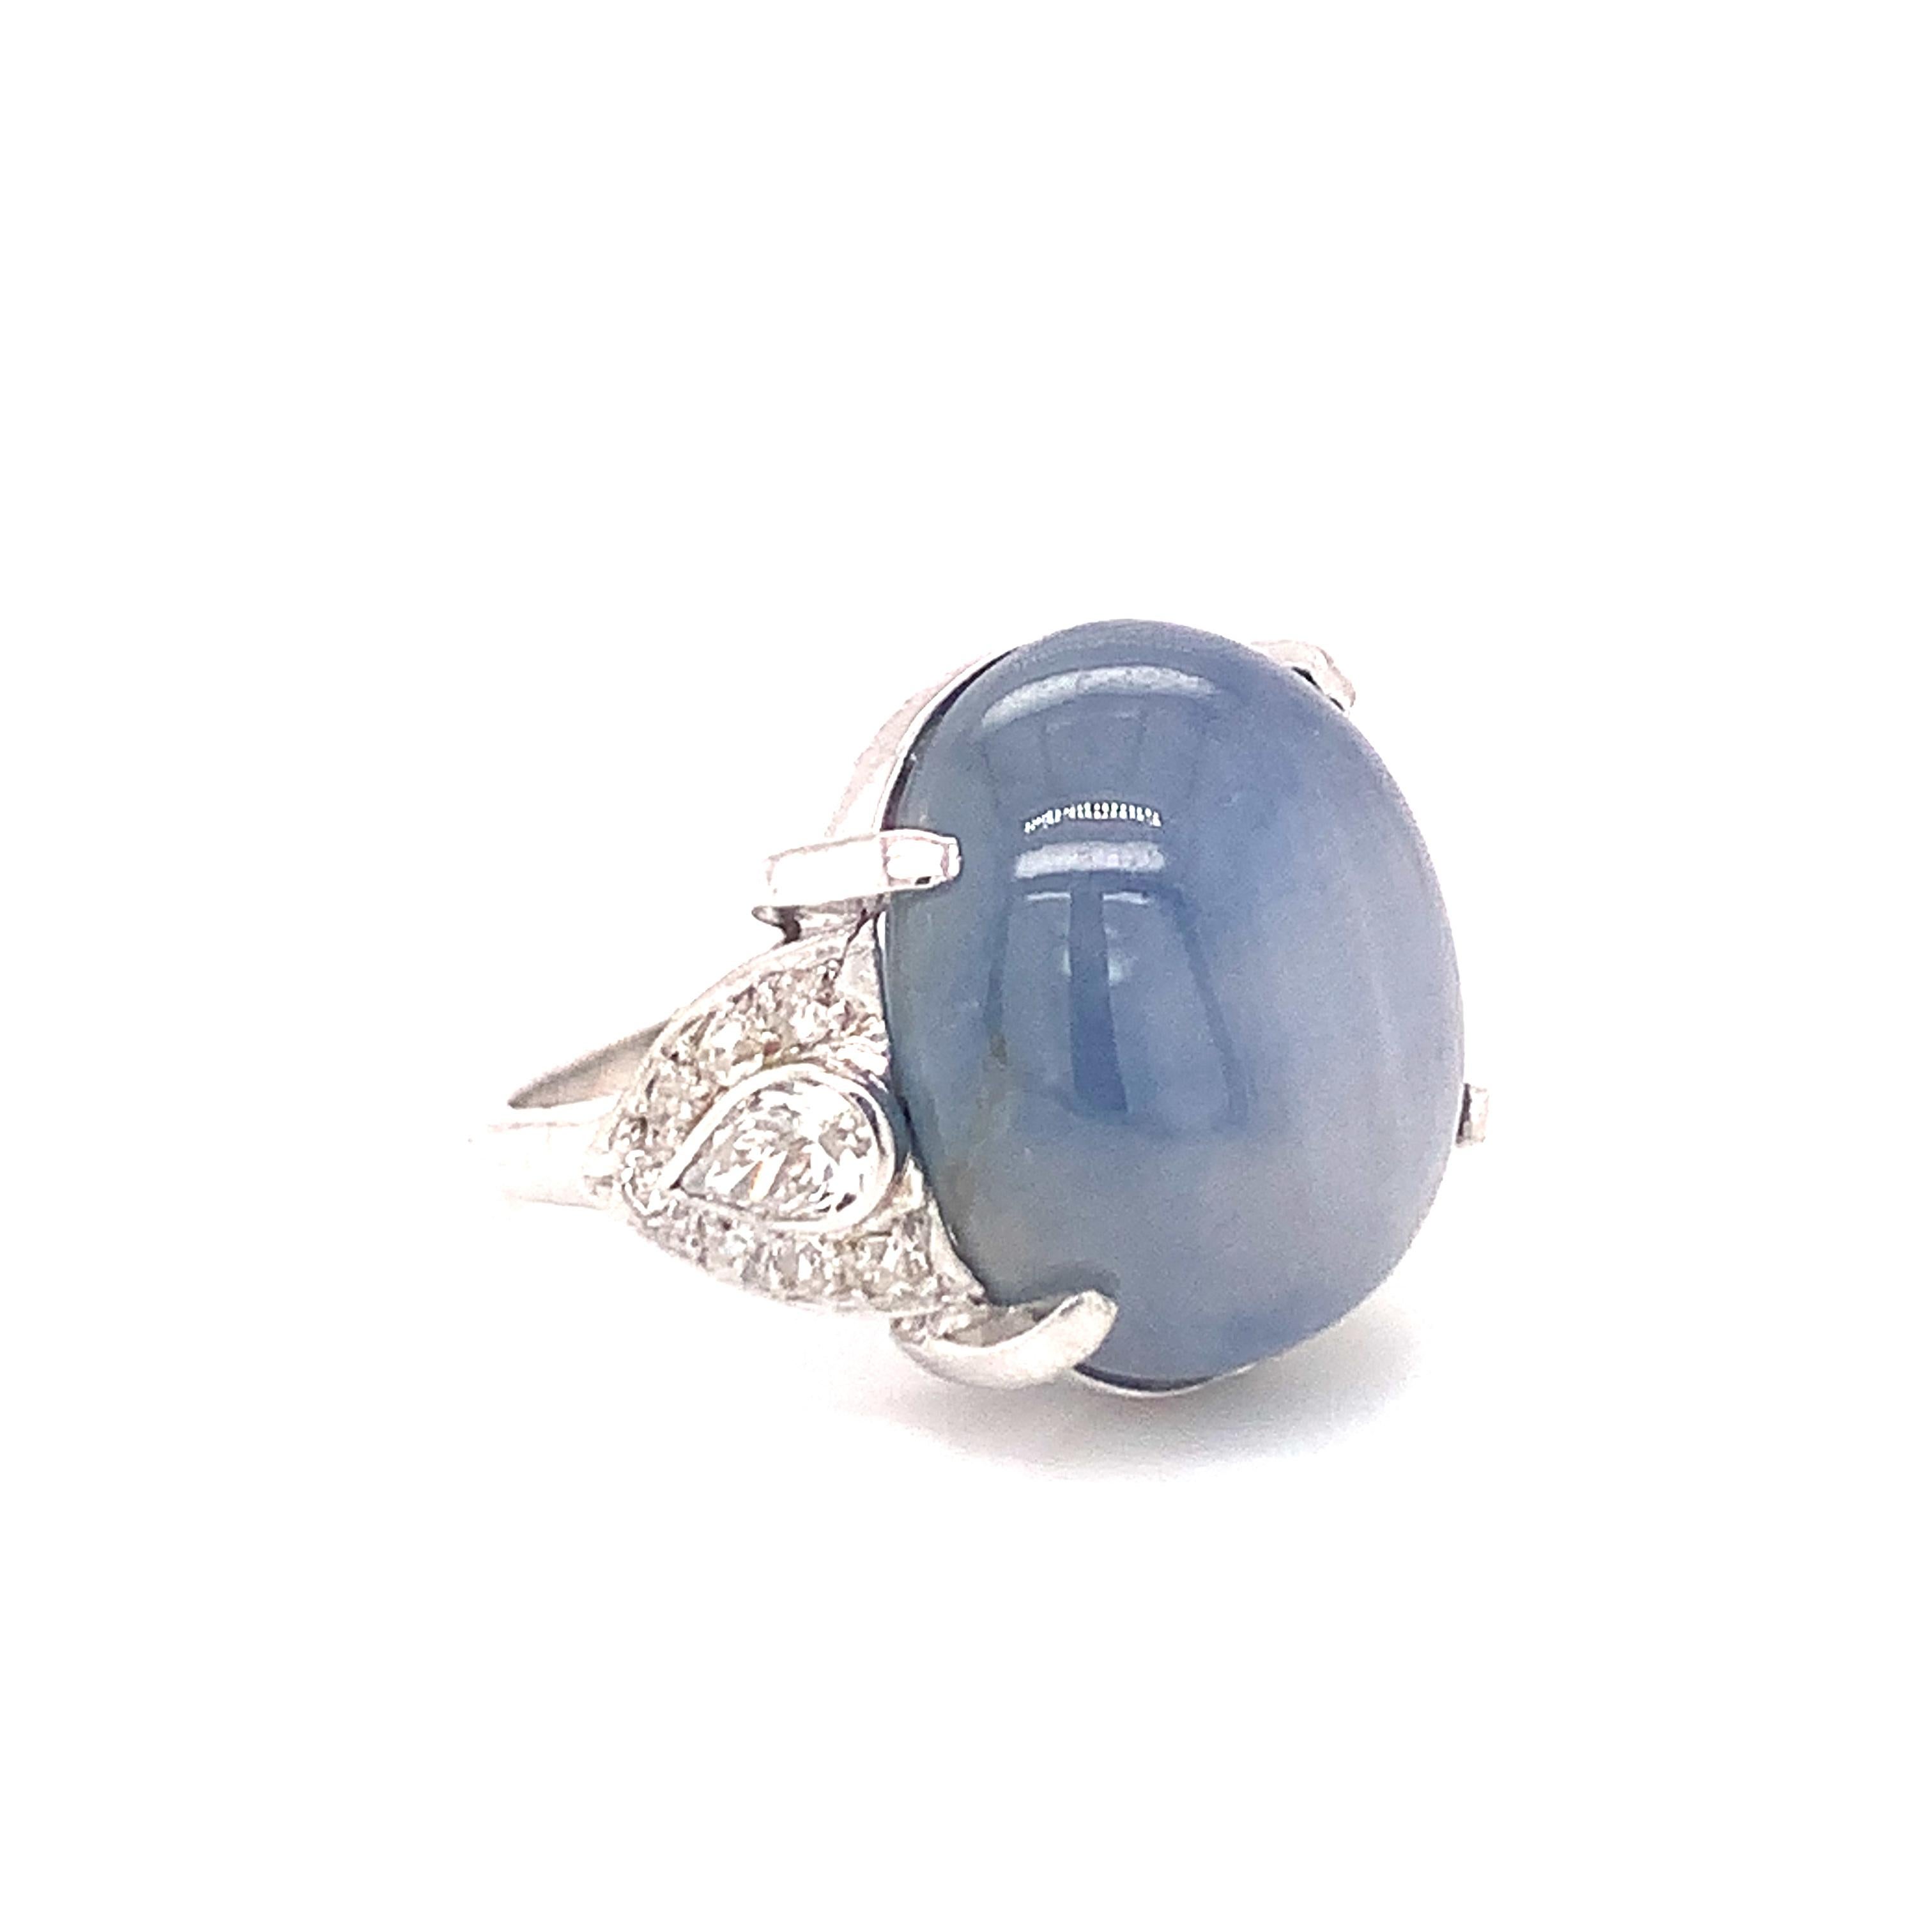 Art Deco star sapphire and diamond platinum ring featuring one oval cabochon cut, grayish blue star sapphire weighing 36 ct. further accented by old European, single round cut and pear brilliant diamonds totaling 1.25 ct. with H-I color and SI-1